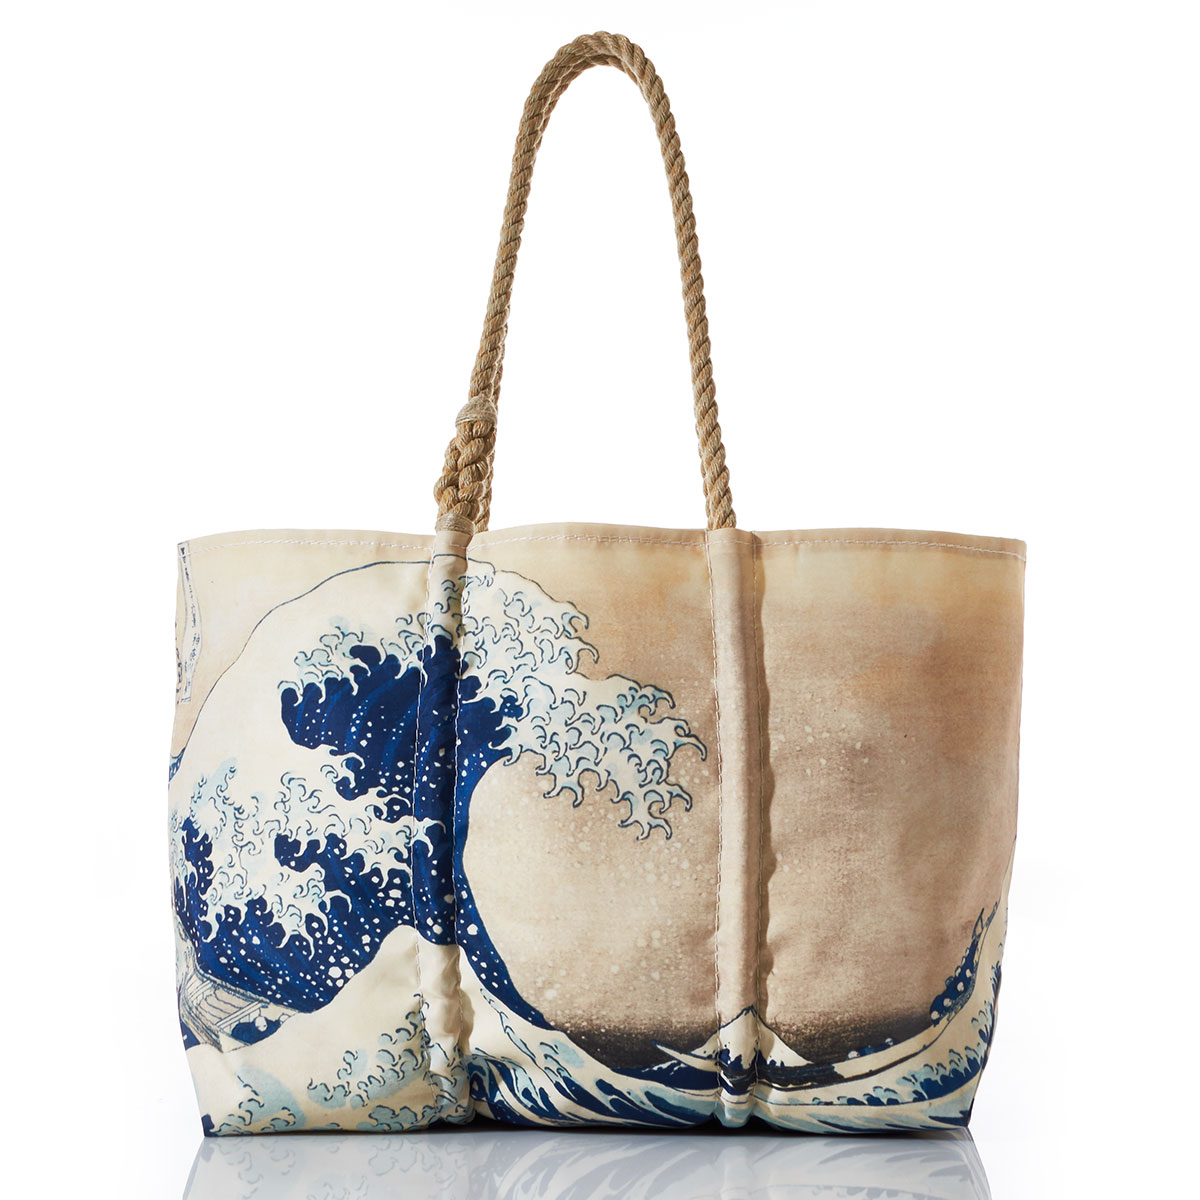 The Great Wave of Kanagawa printed on a recycled sail cloth tote with hemp rope handles